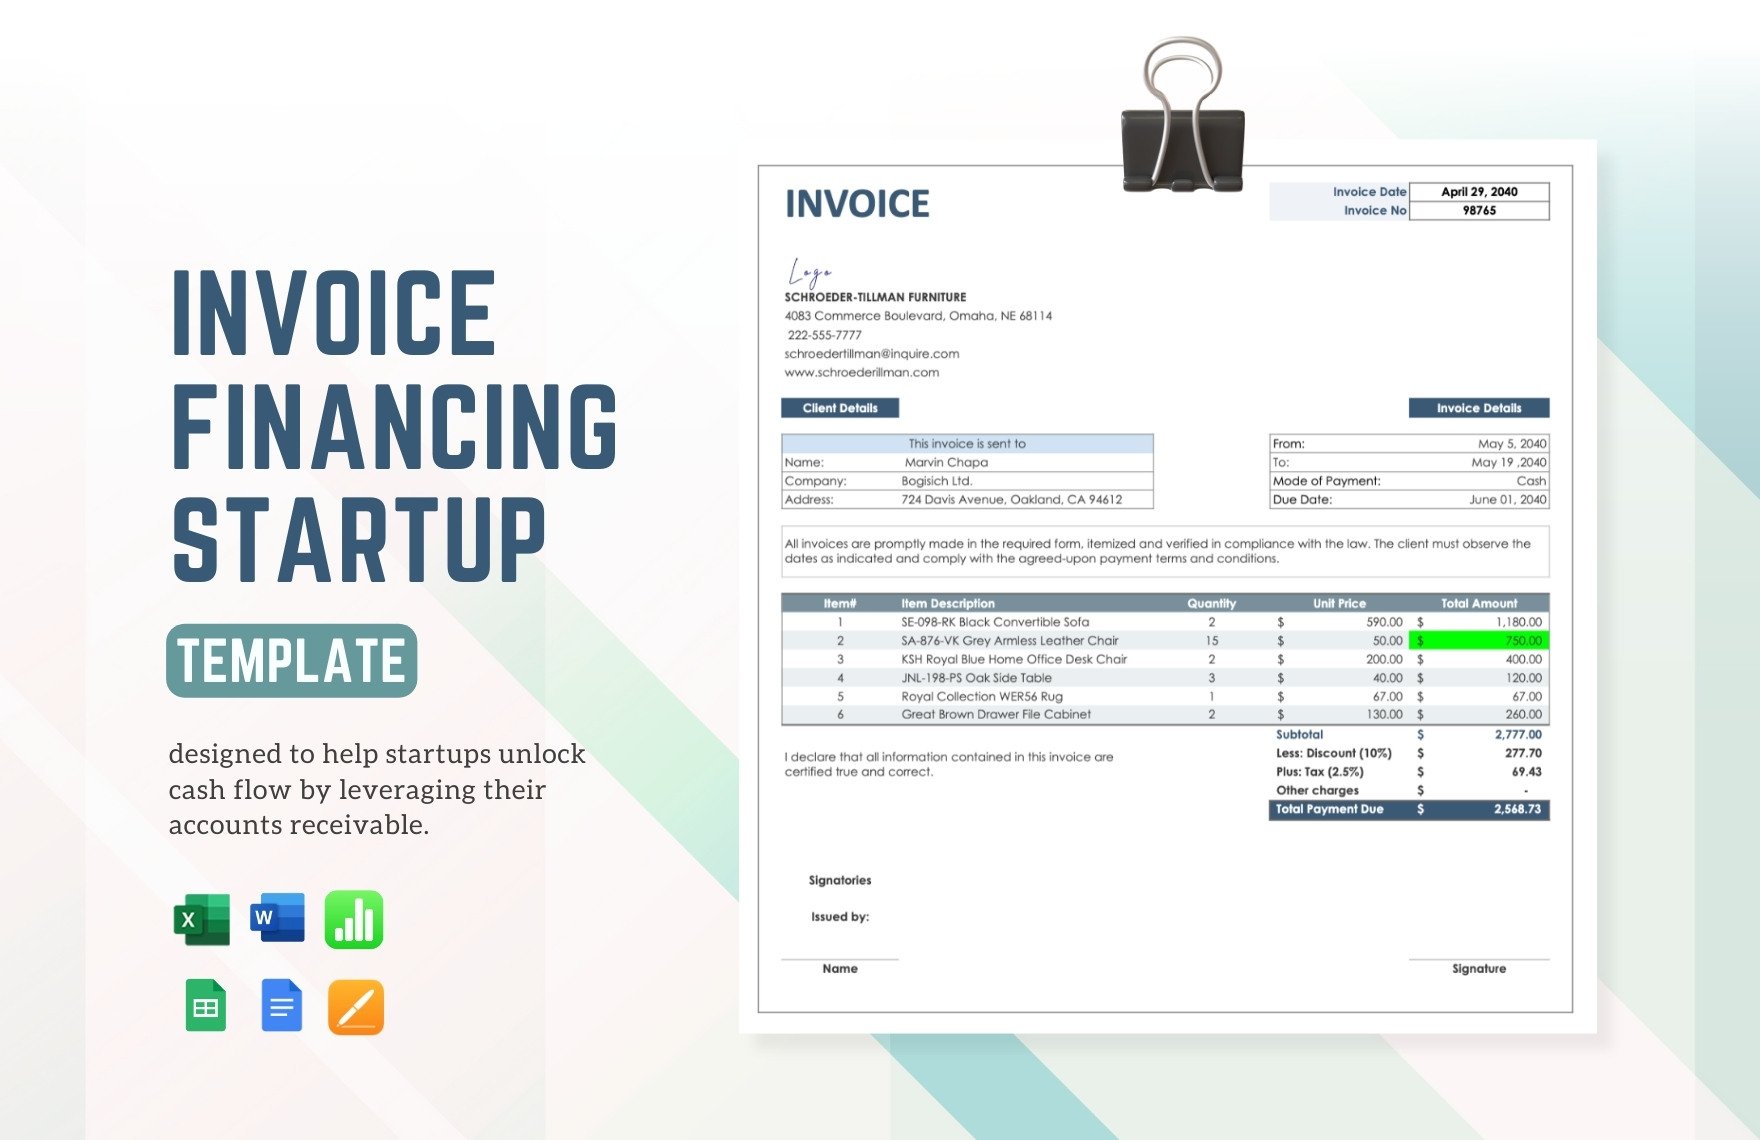 Free Invoice Financing Startup Template